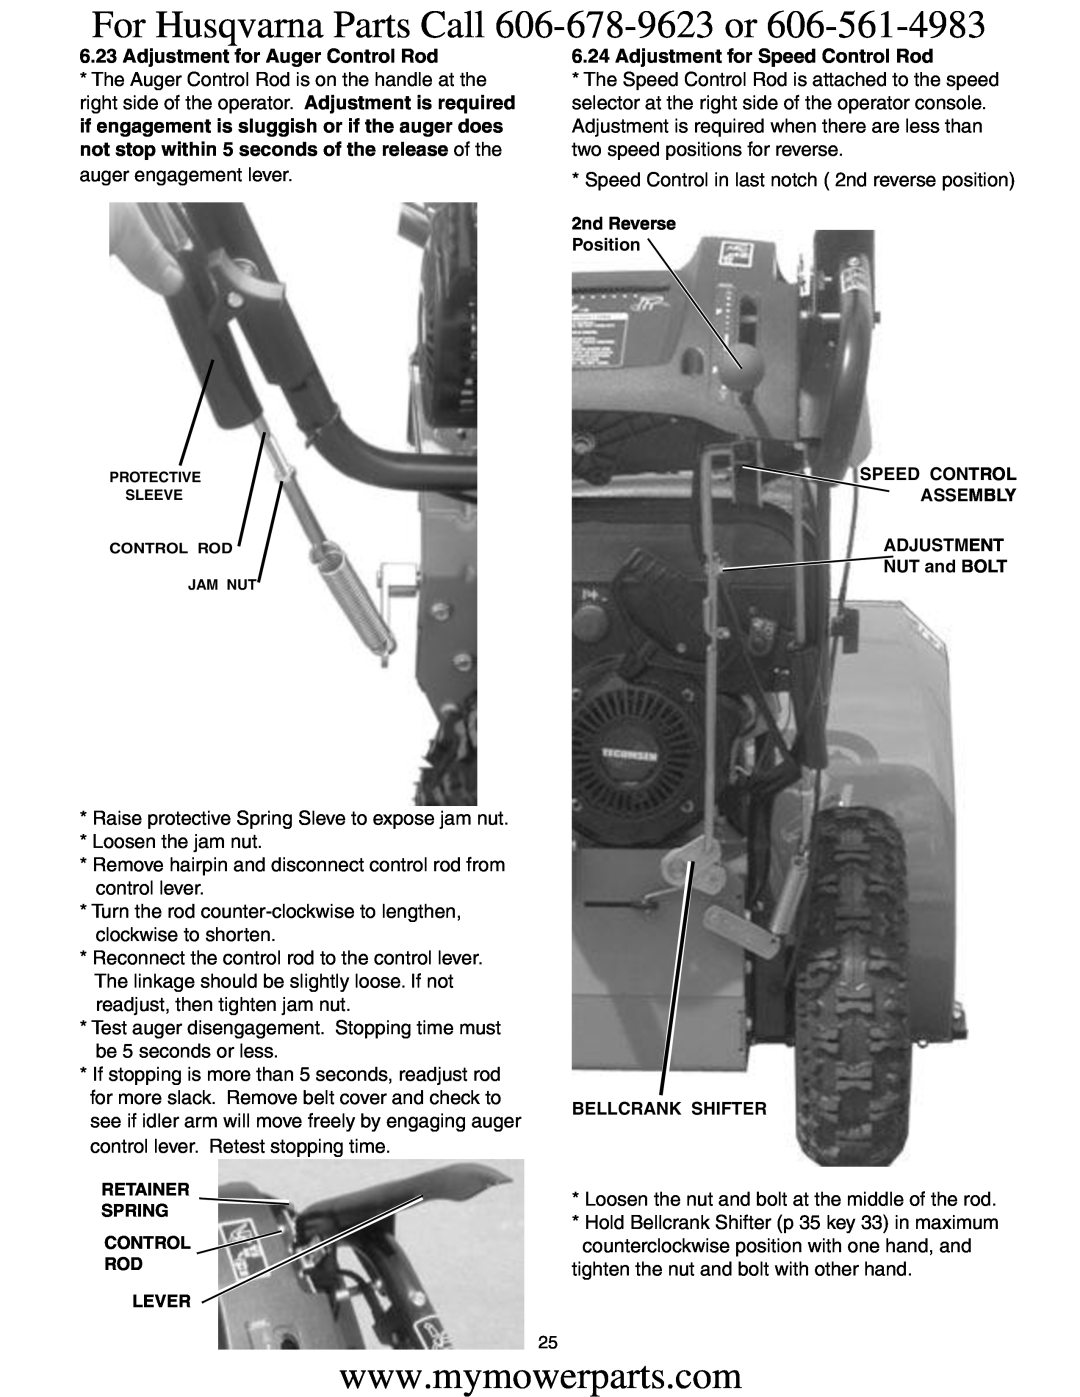 Electrolux OHV service manual For Husqvarna Parts Call 606-678-9623 or, Adjustment for Auger Control Rod 